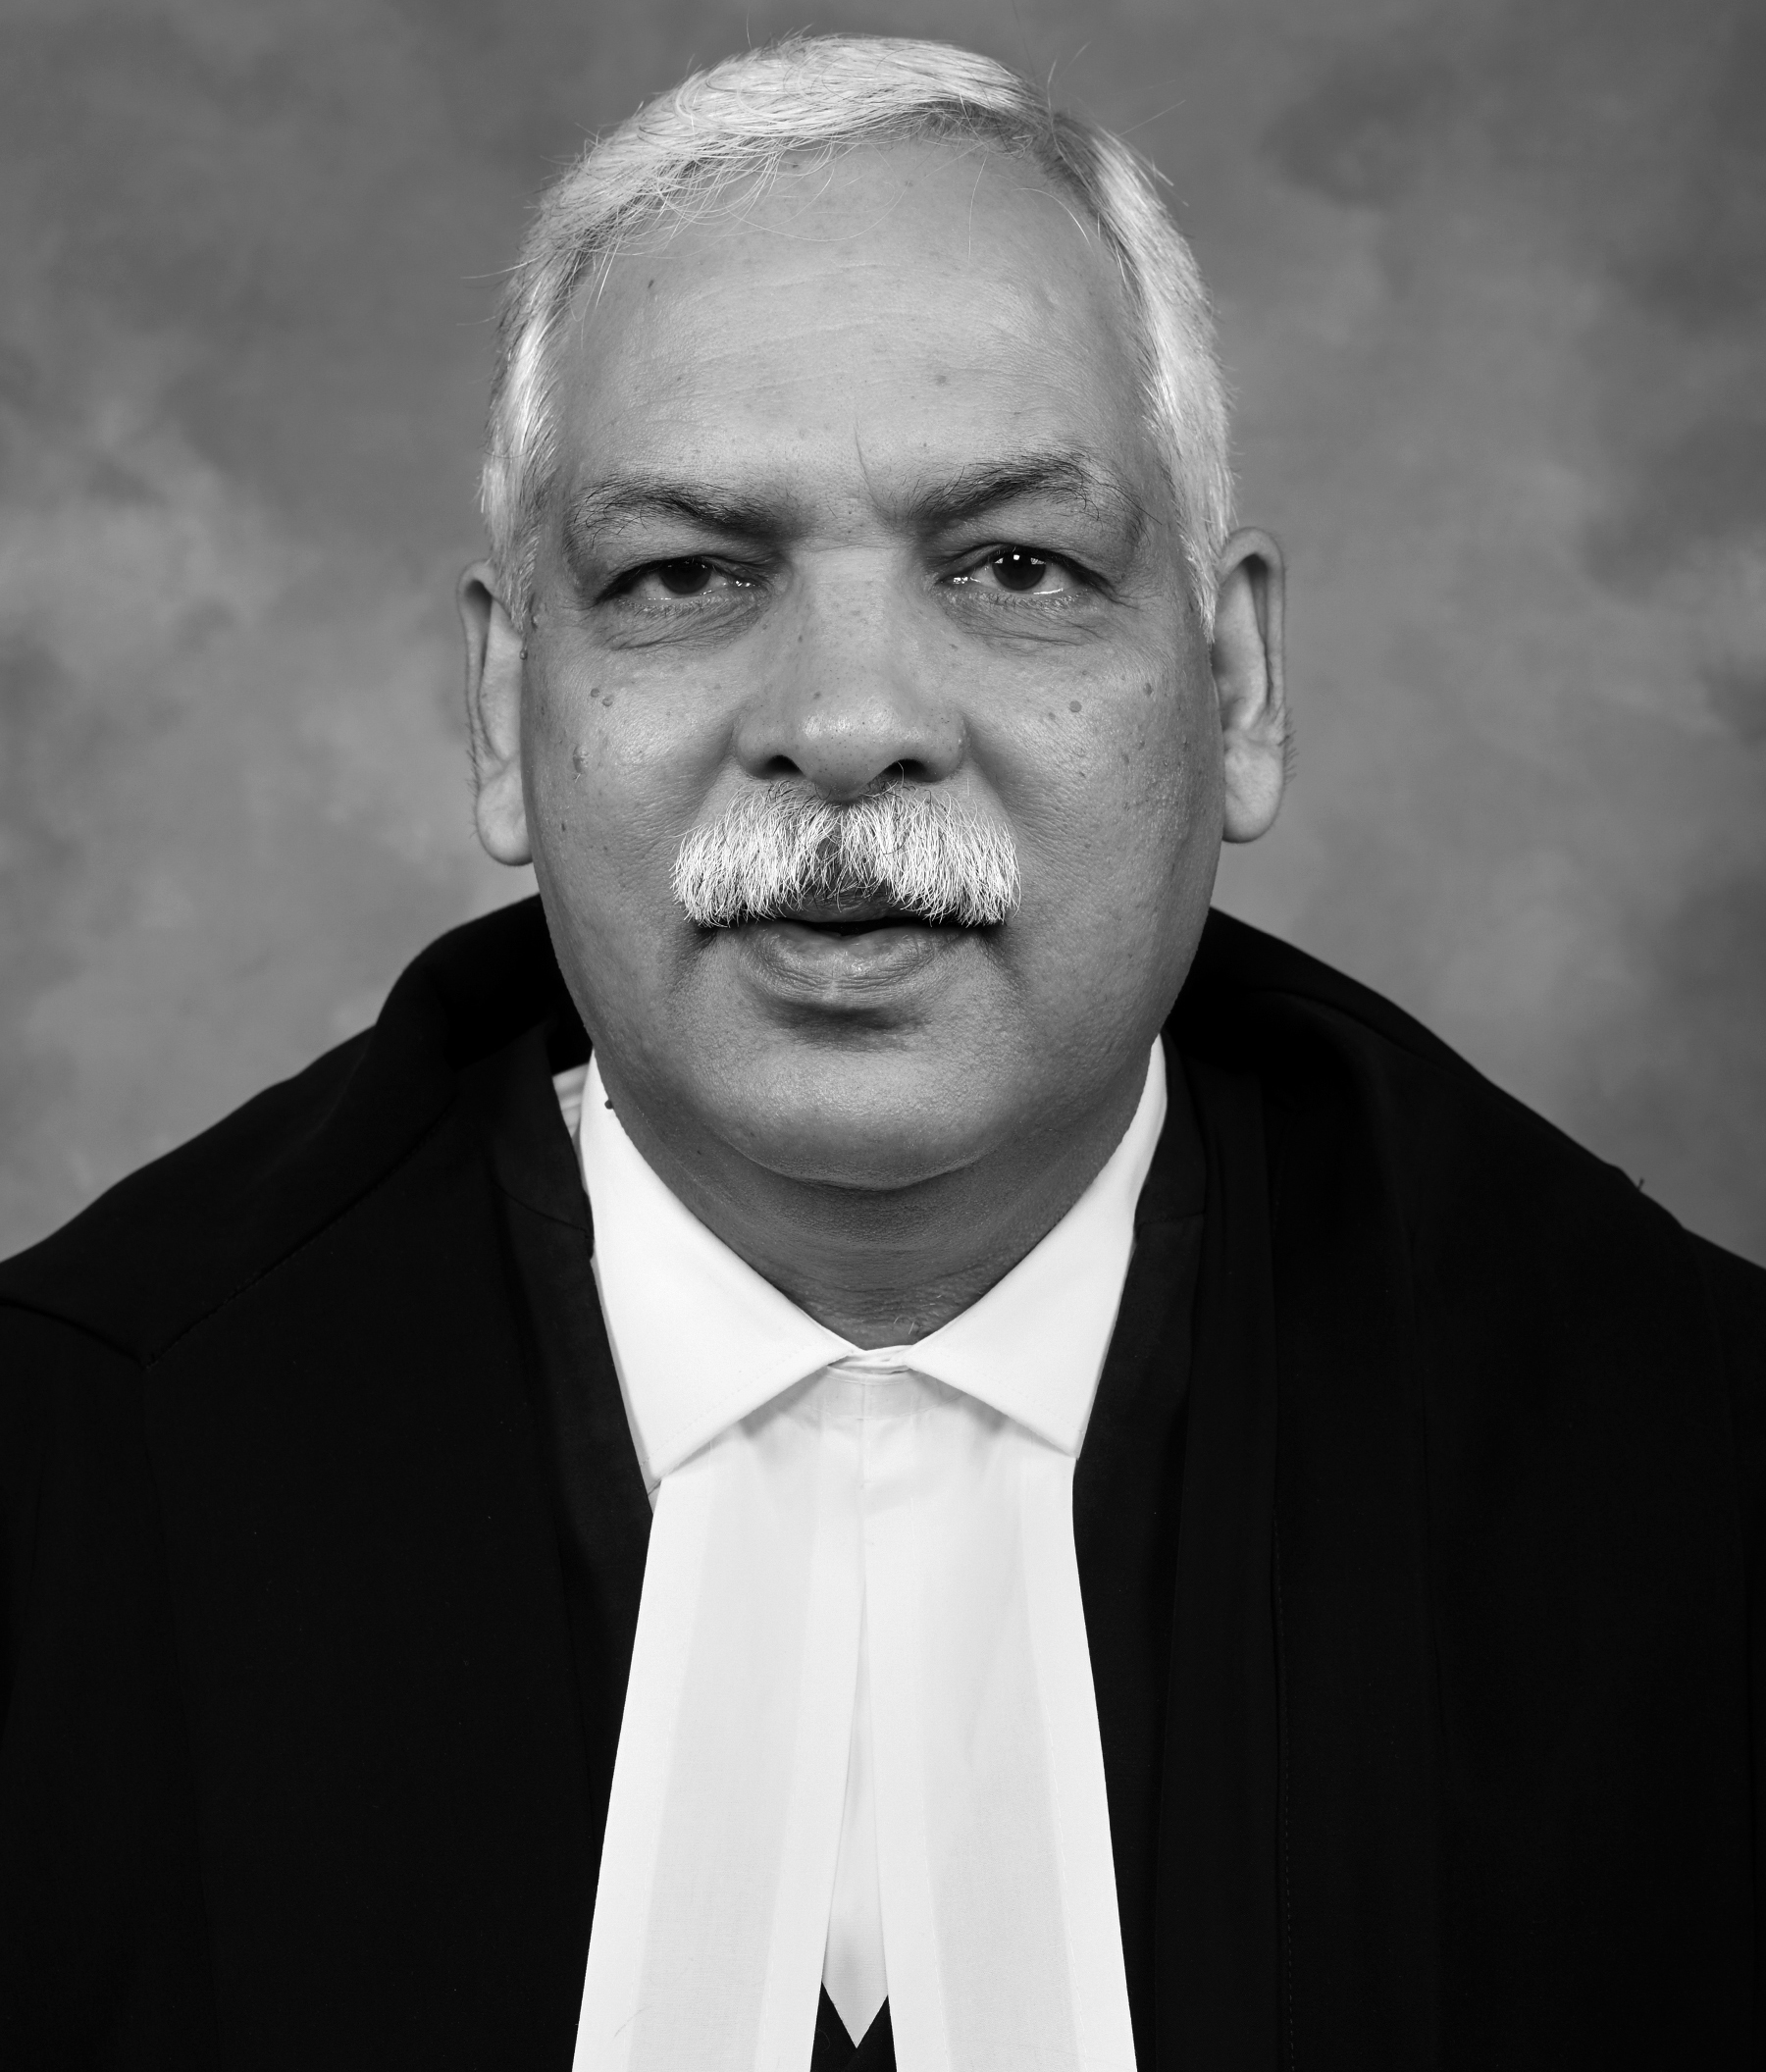 Honble Chief Justice